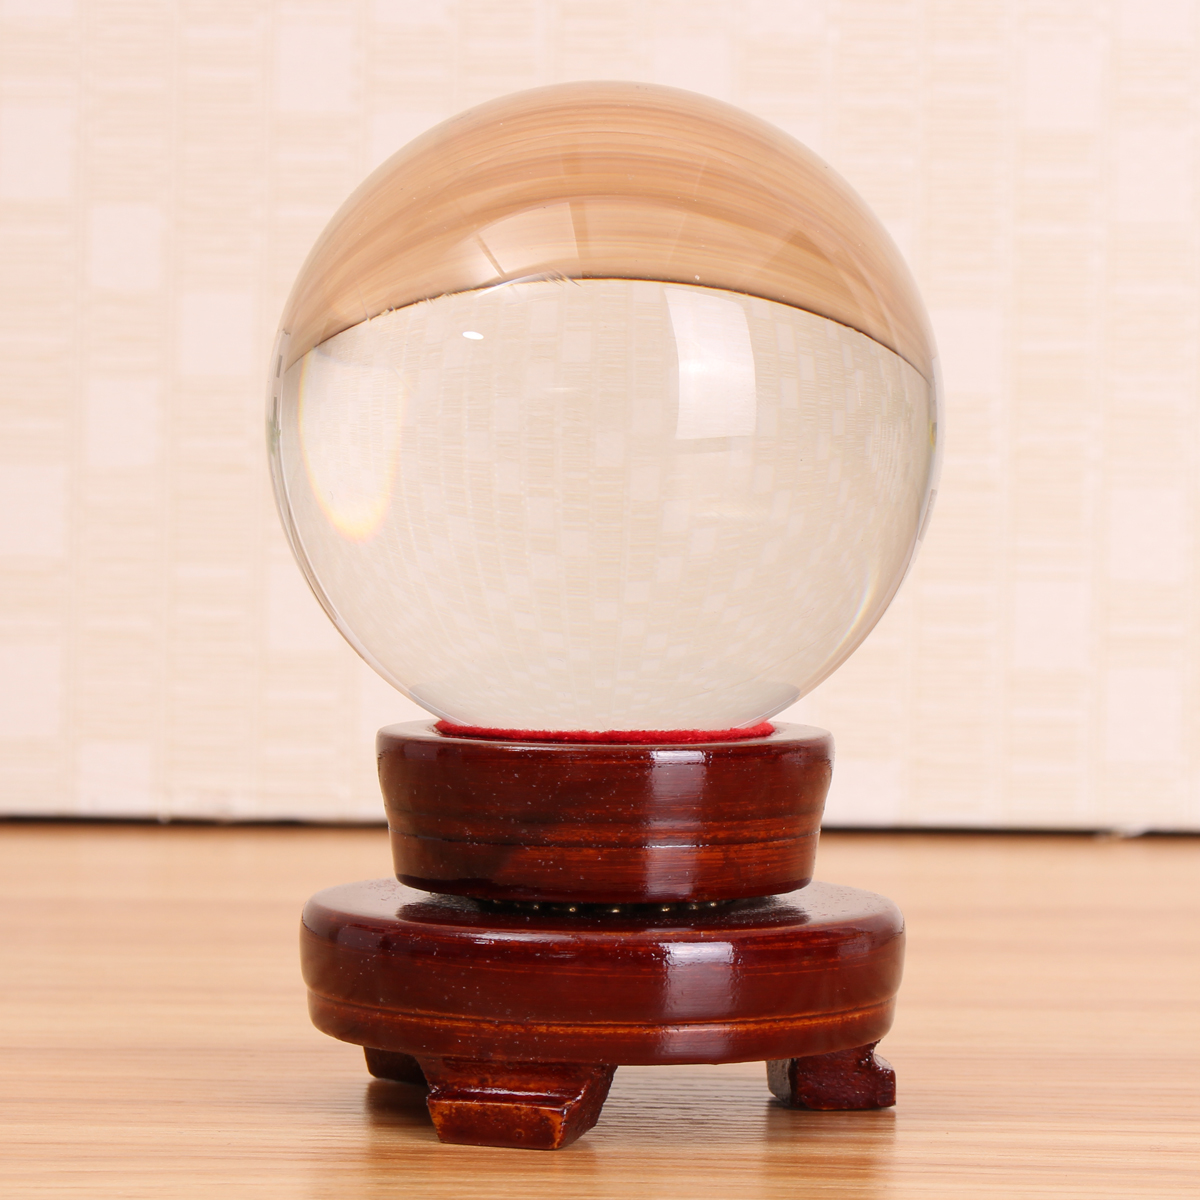 

Clear Quartz Glass Magic Crystal Healing Ball Sphere With Stand Hobbies Kids Toys Home Decorations